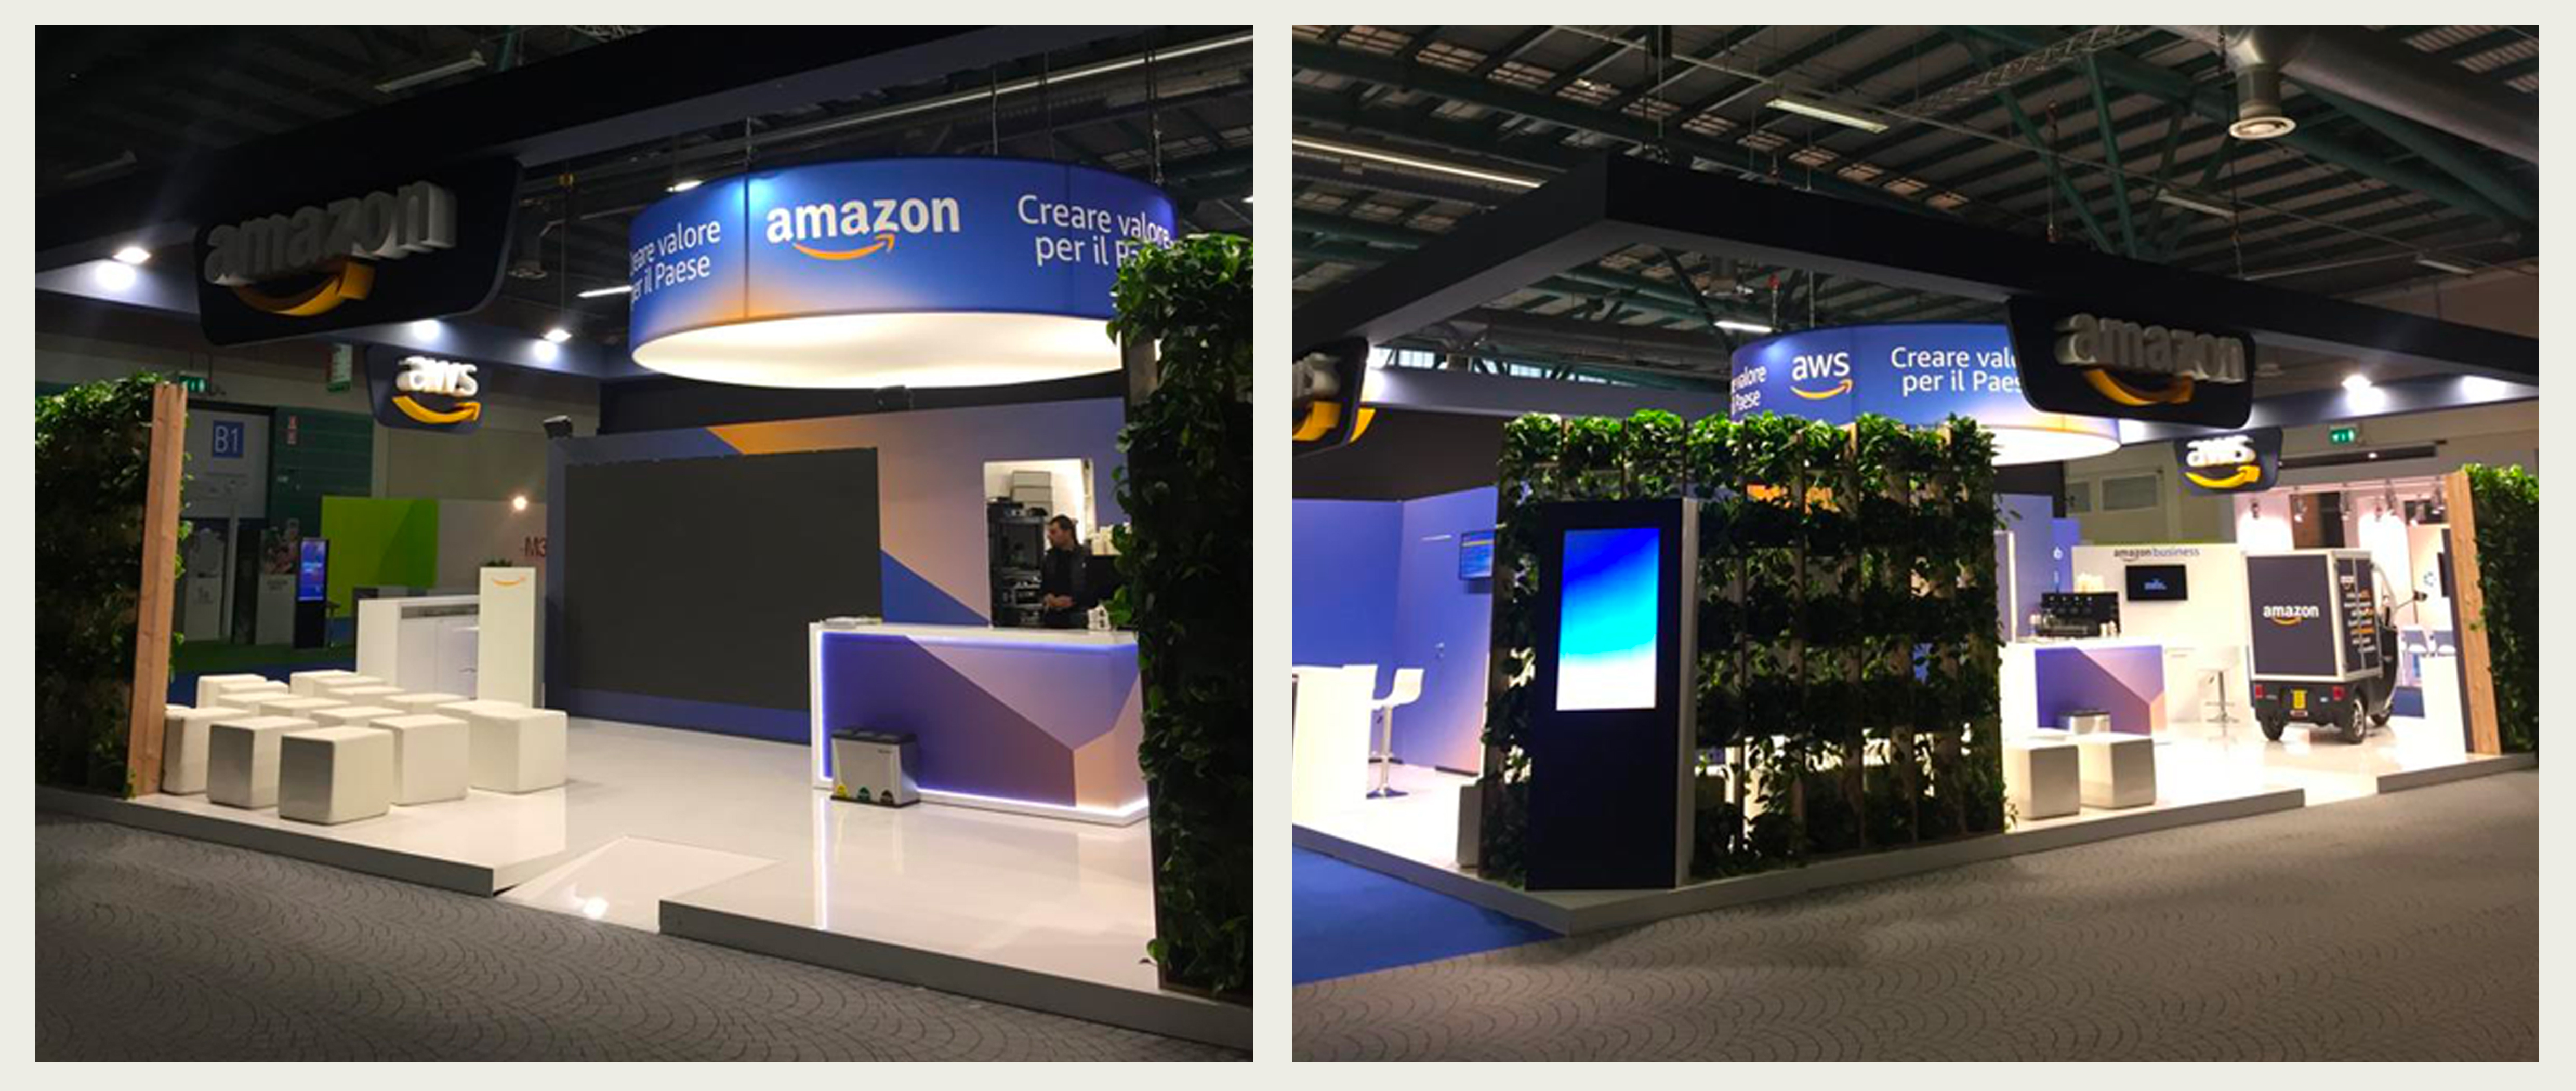 The Amazon & AWS stand created by ATC for ANCI 2022